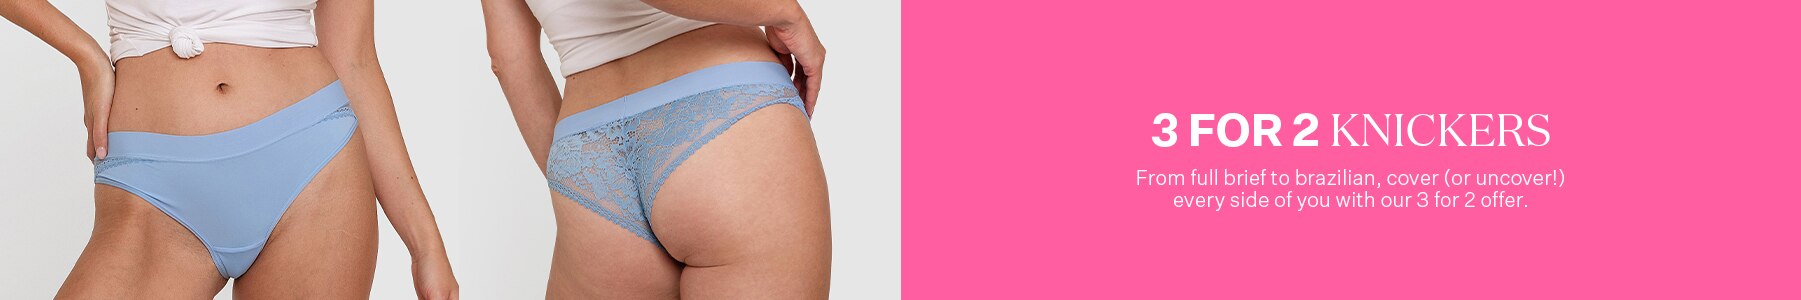 3 for 2 Knickers. From full brief to brazilian, cover (or uncover!) every side of you with our 3 for 2 offer.